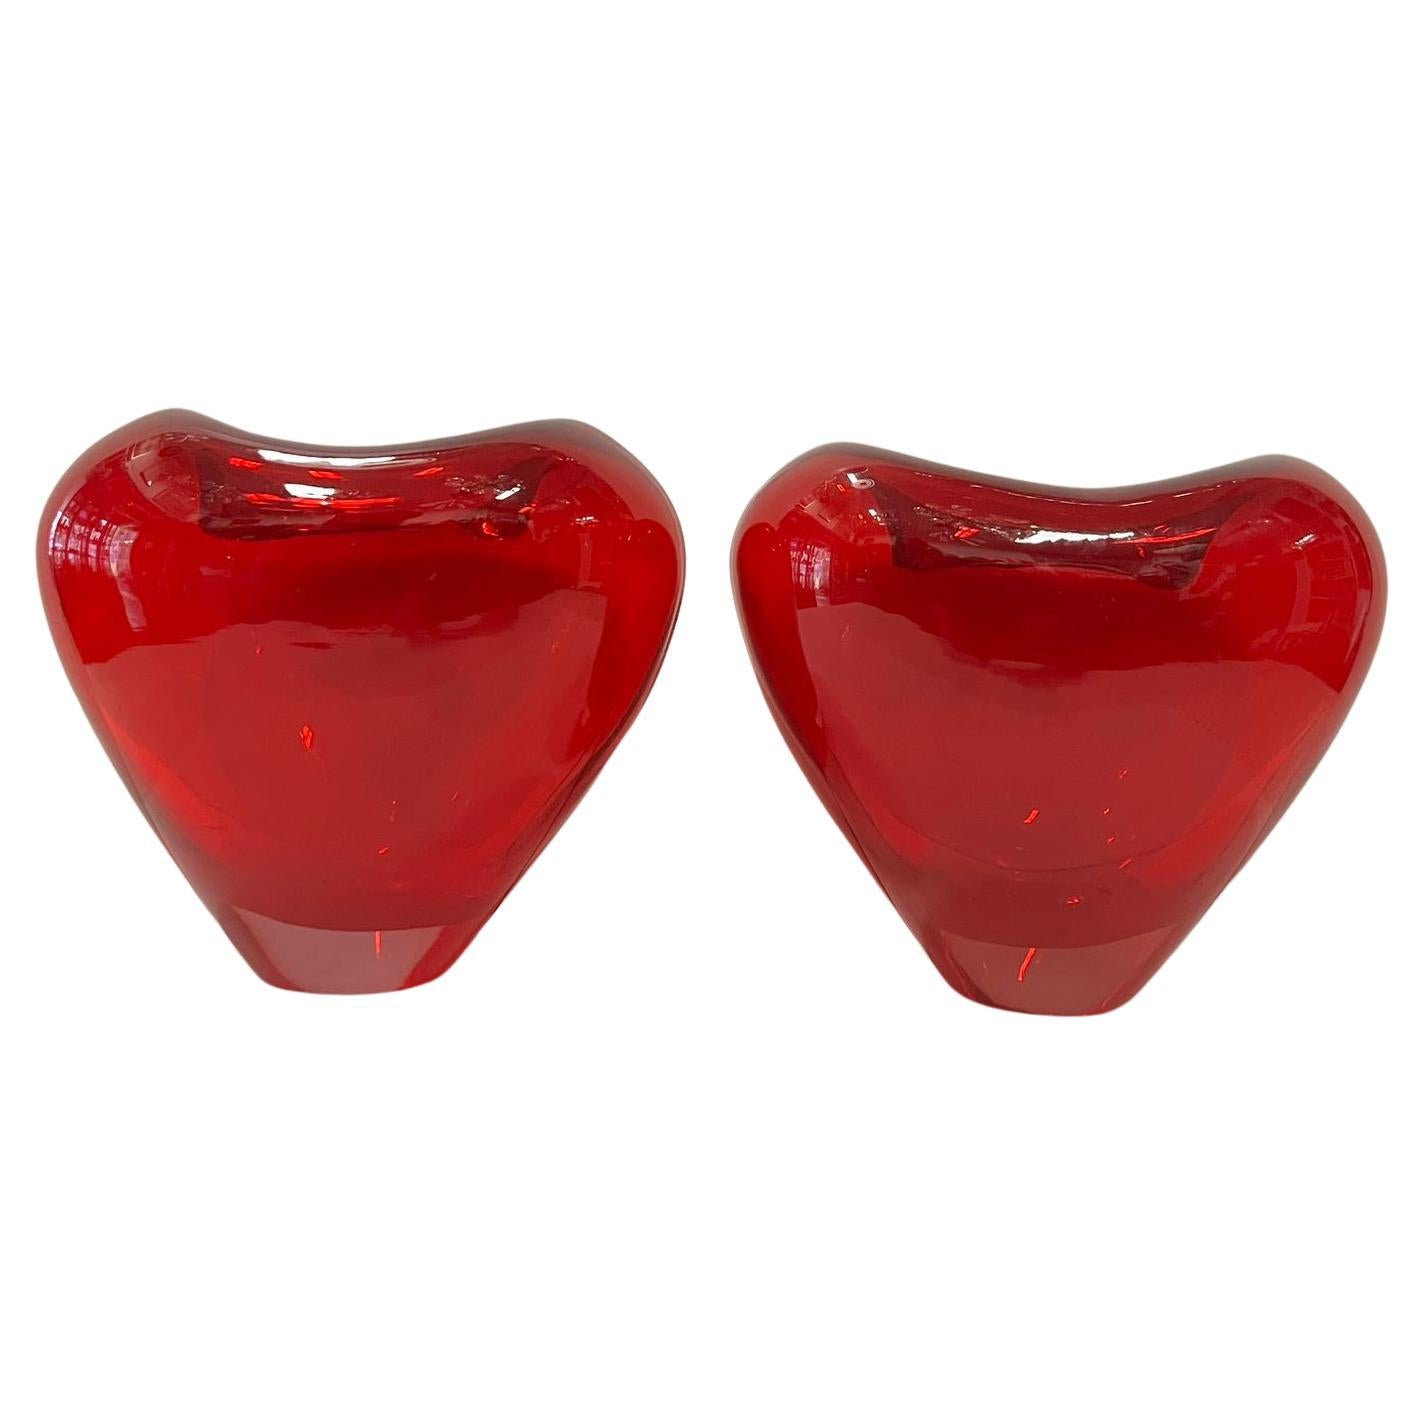 Two Murano Glass Heart Vase by Maria Christina Hamel, 1990s For Sale 2